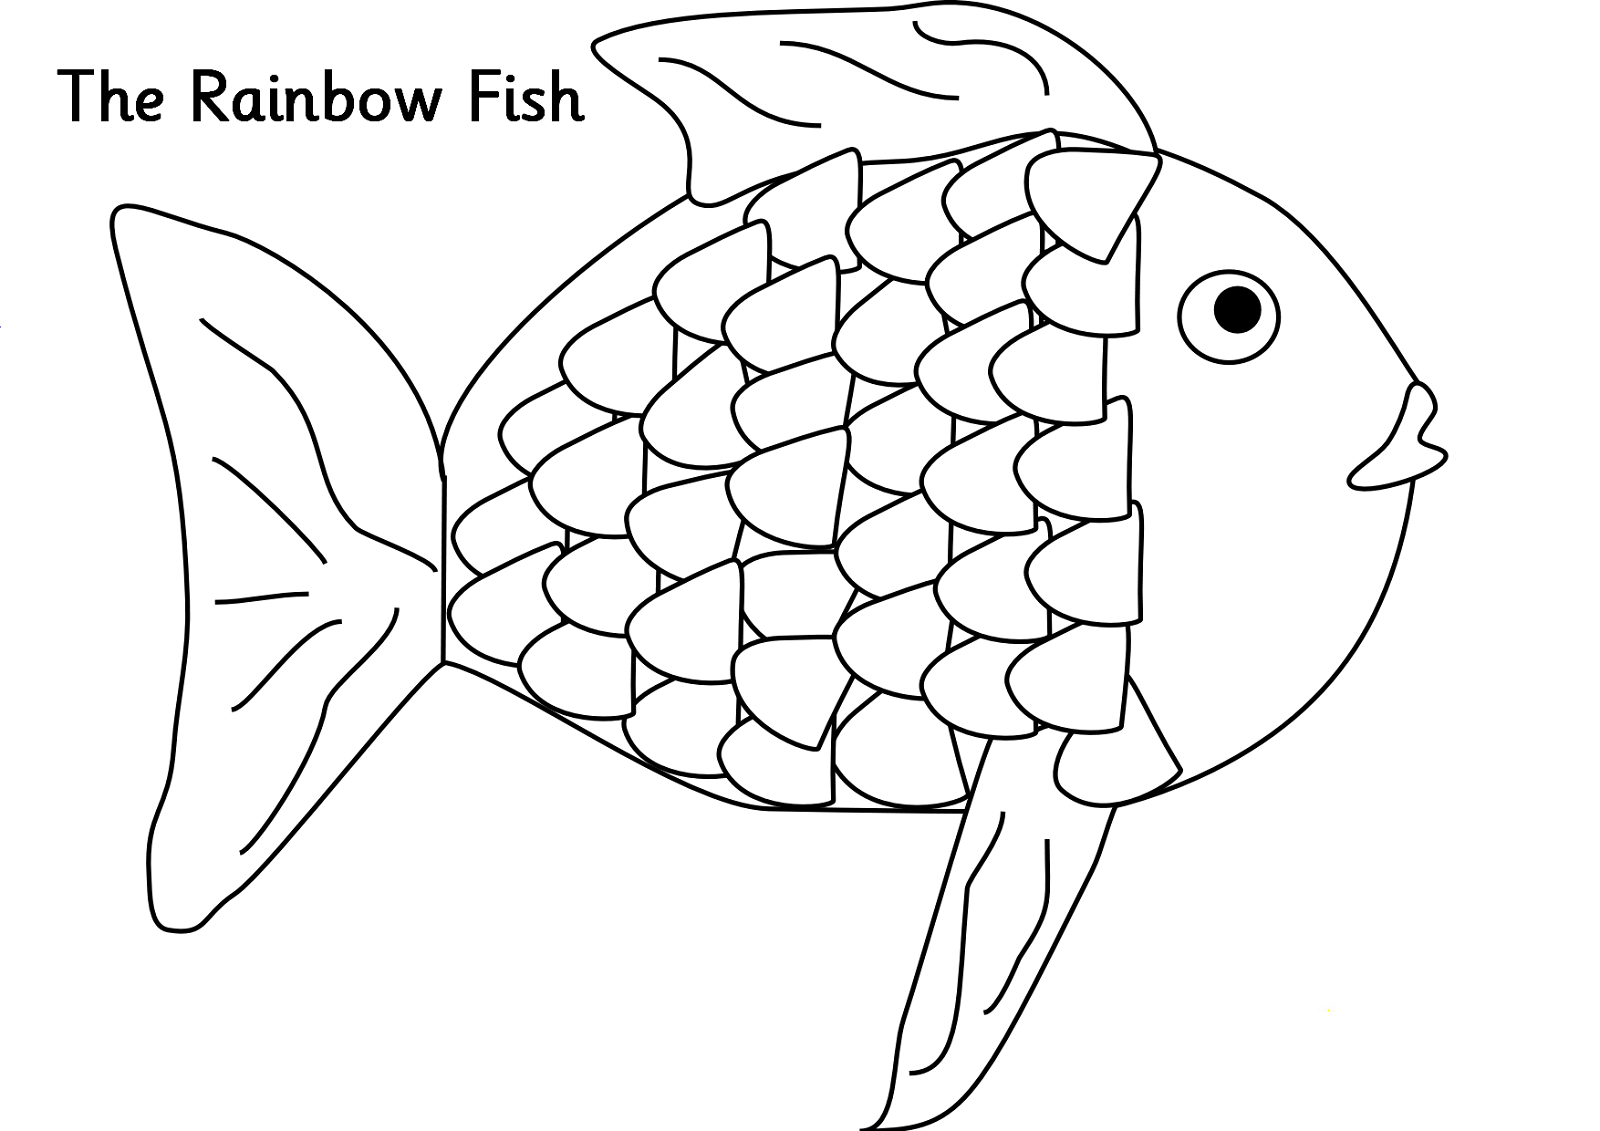 fish-coloring-page-2016-printable-activity-shelter